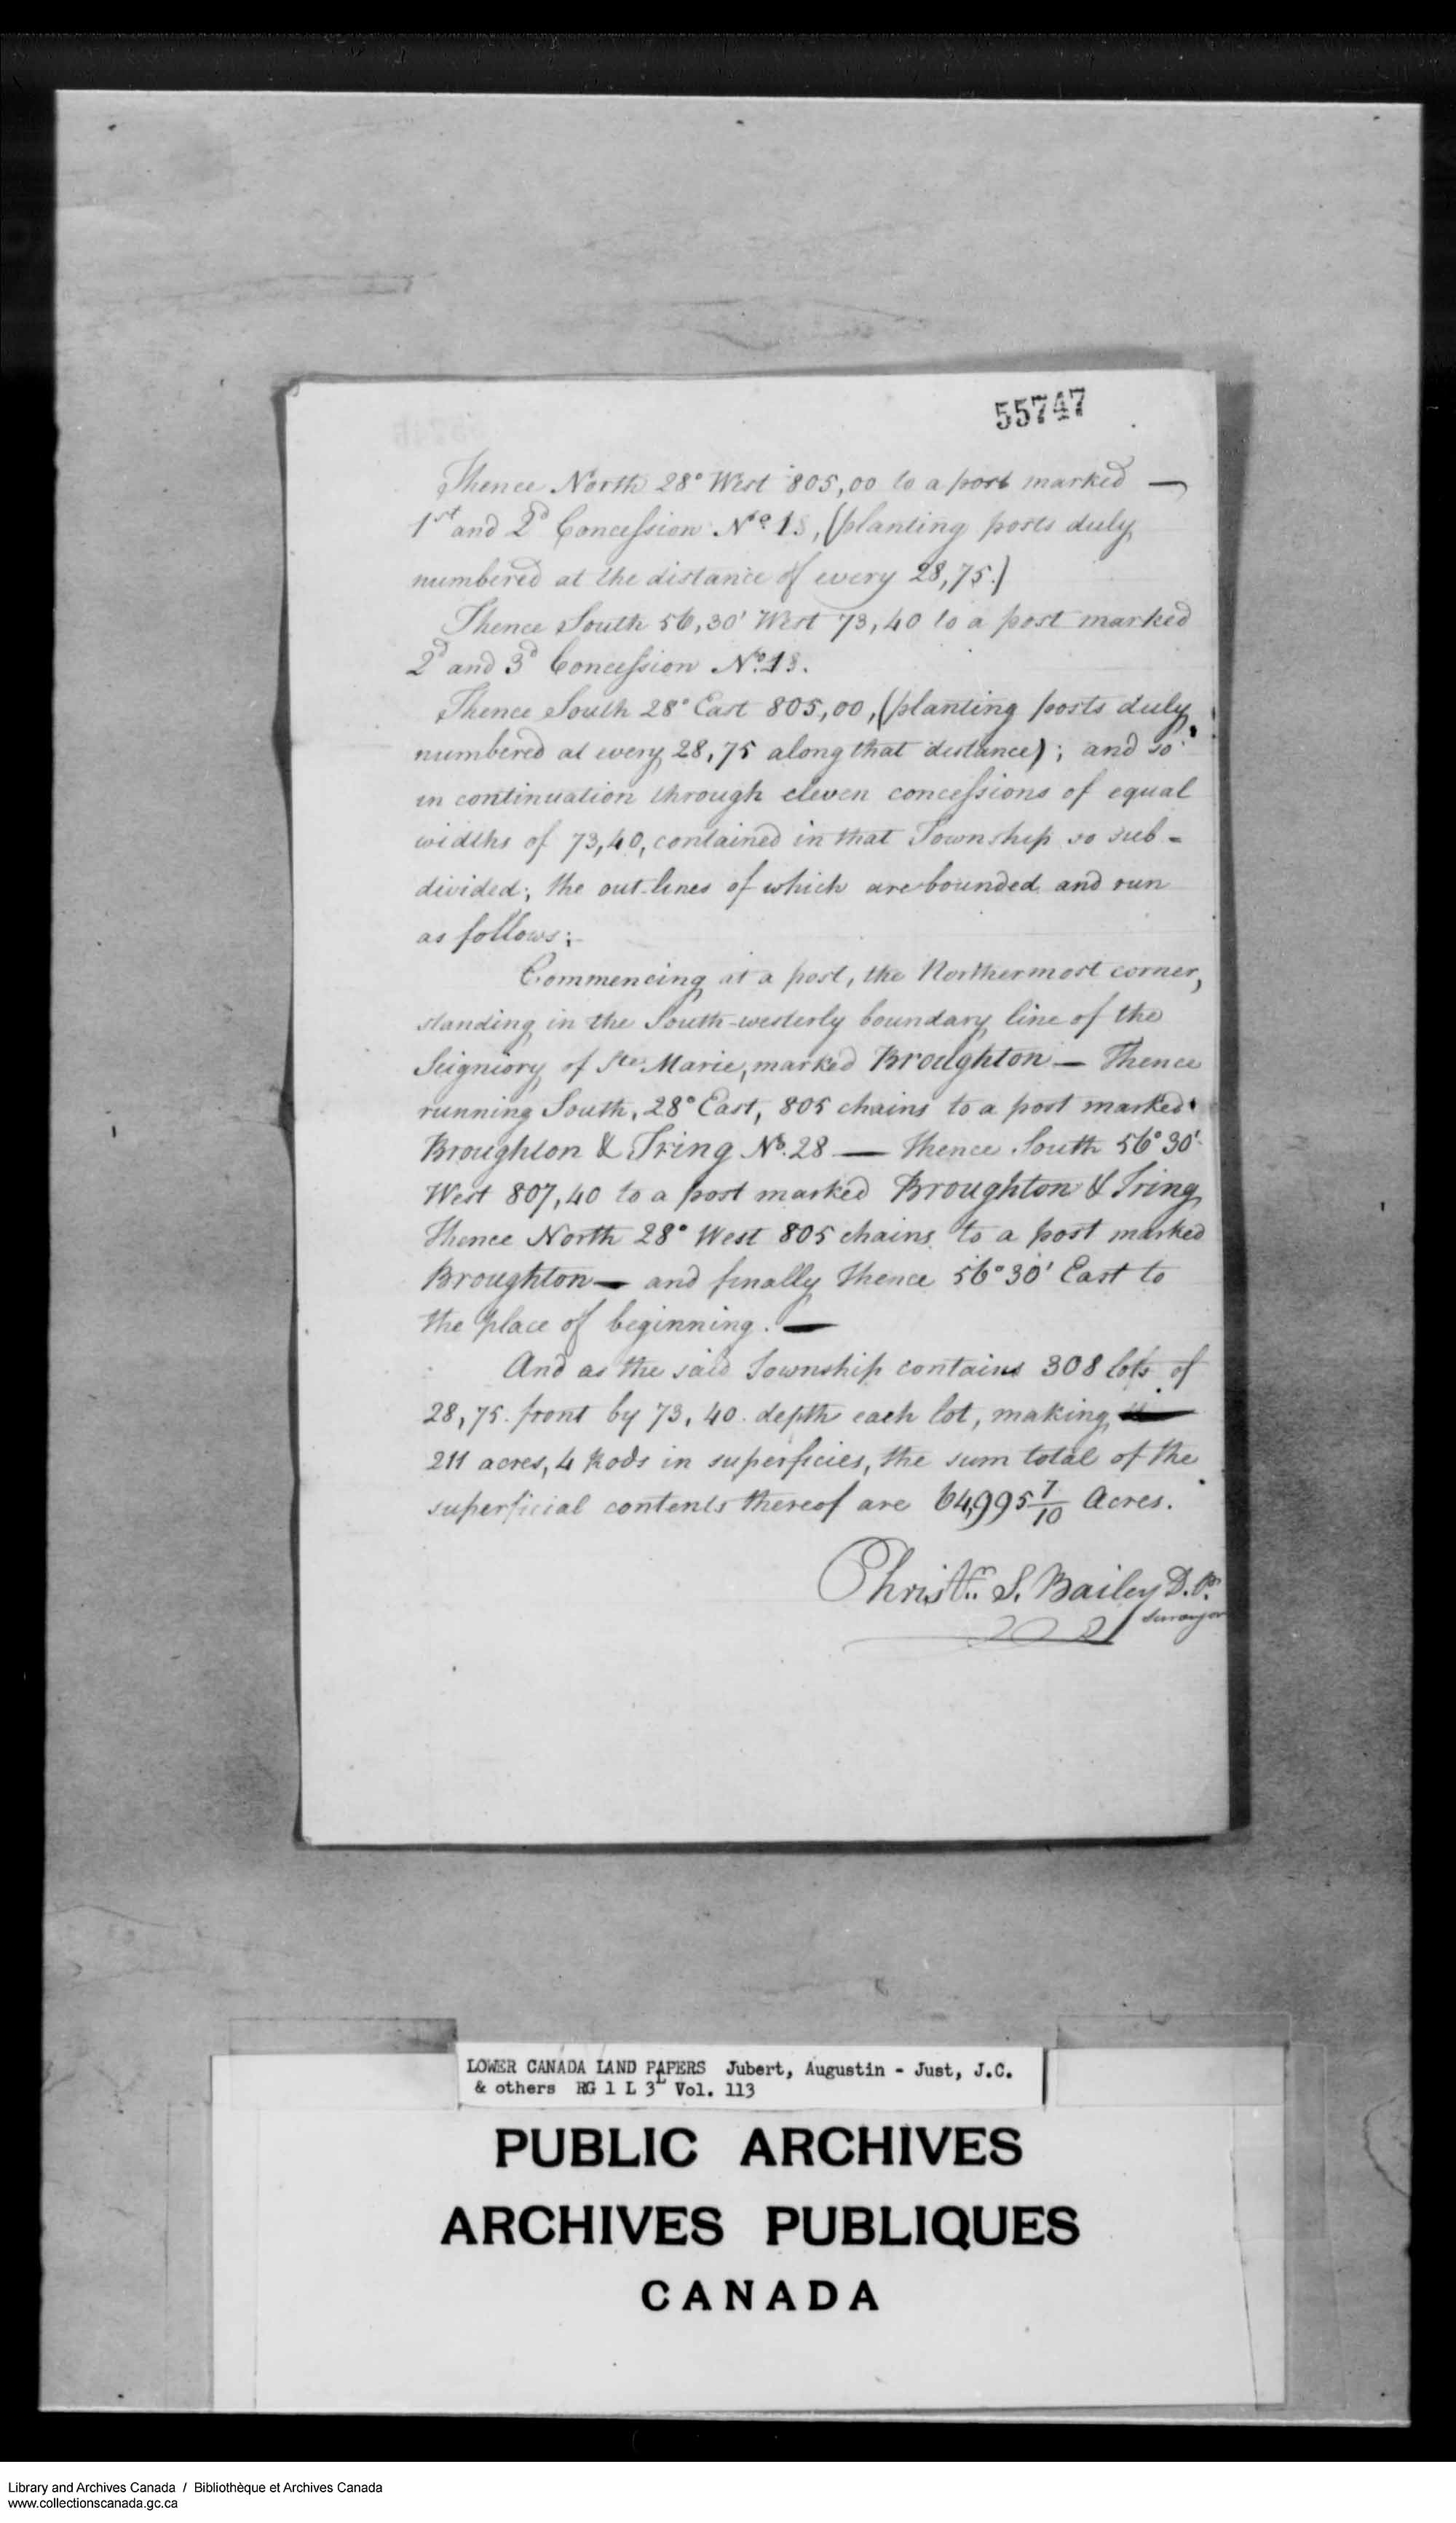 Digitized page of  for Image No.: e008700235